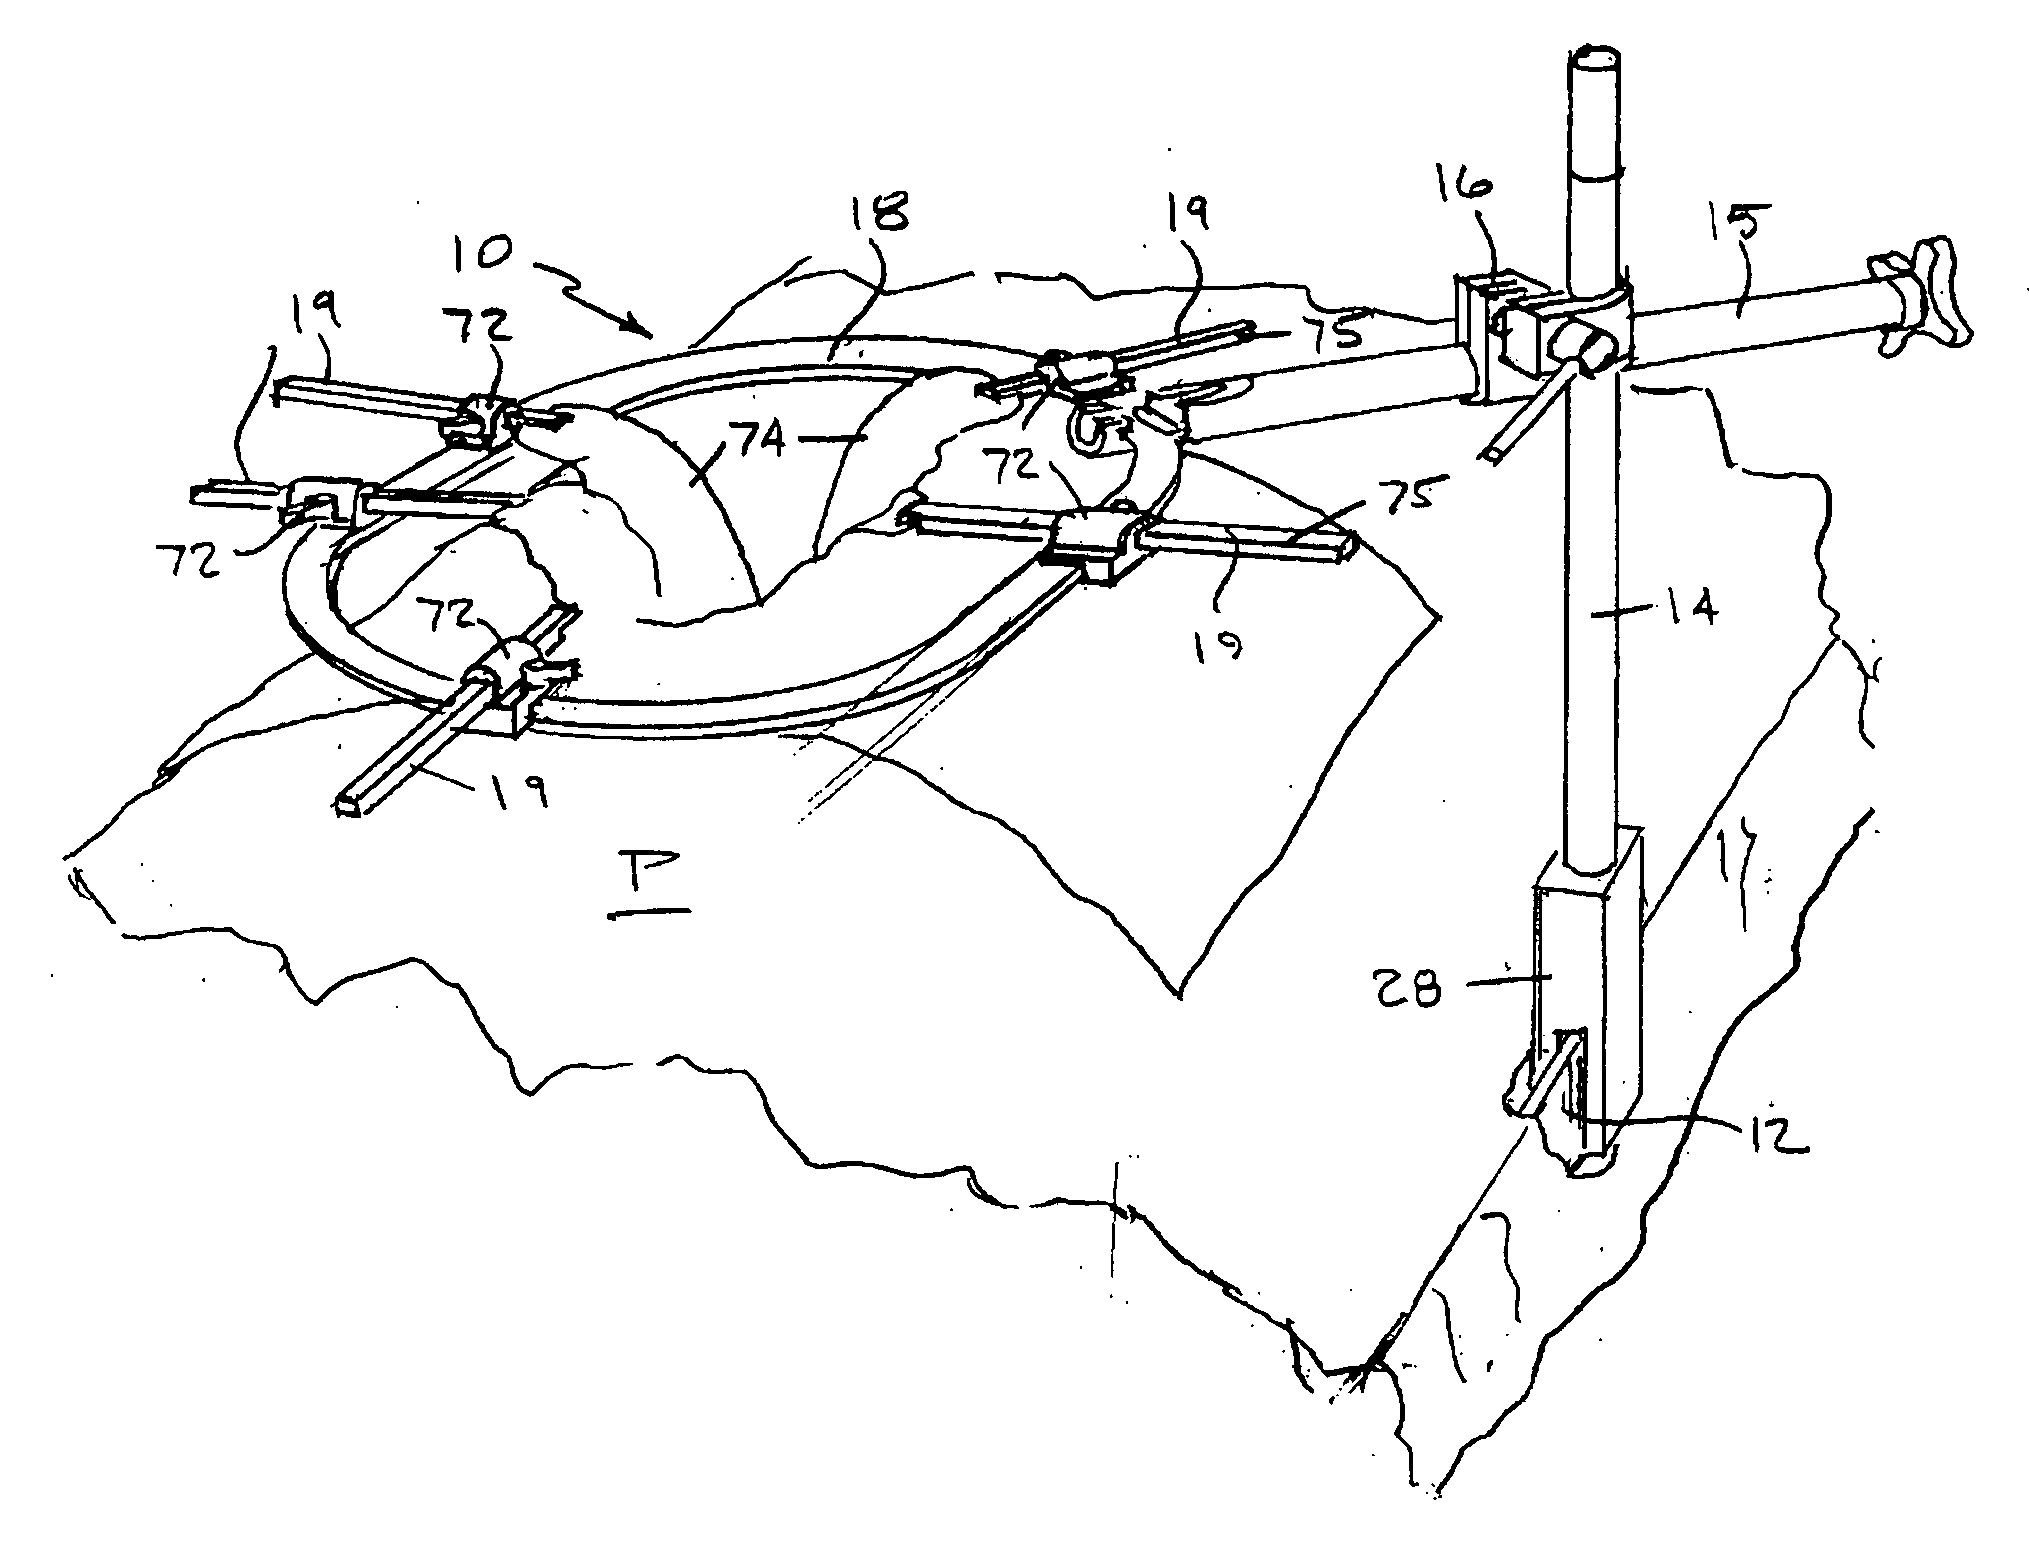 Disposable padding for a self-retaining retraction device